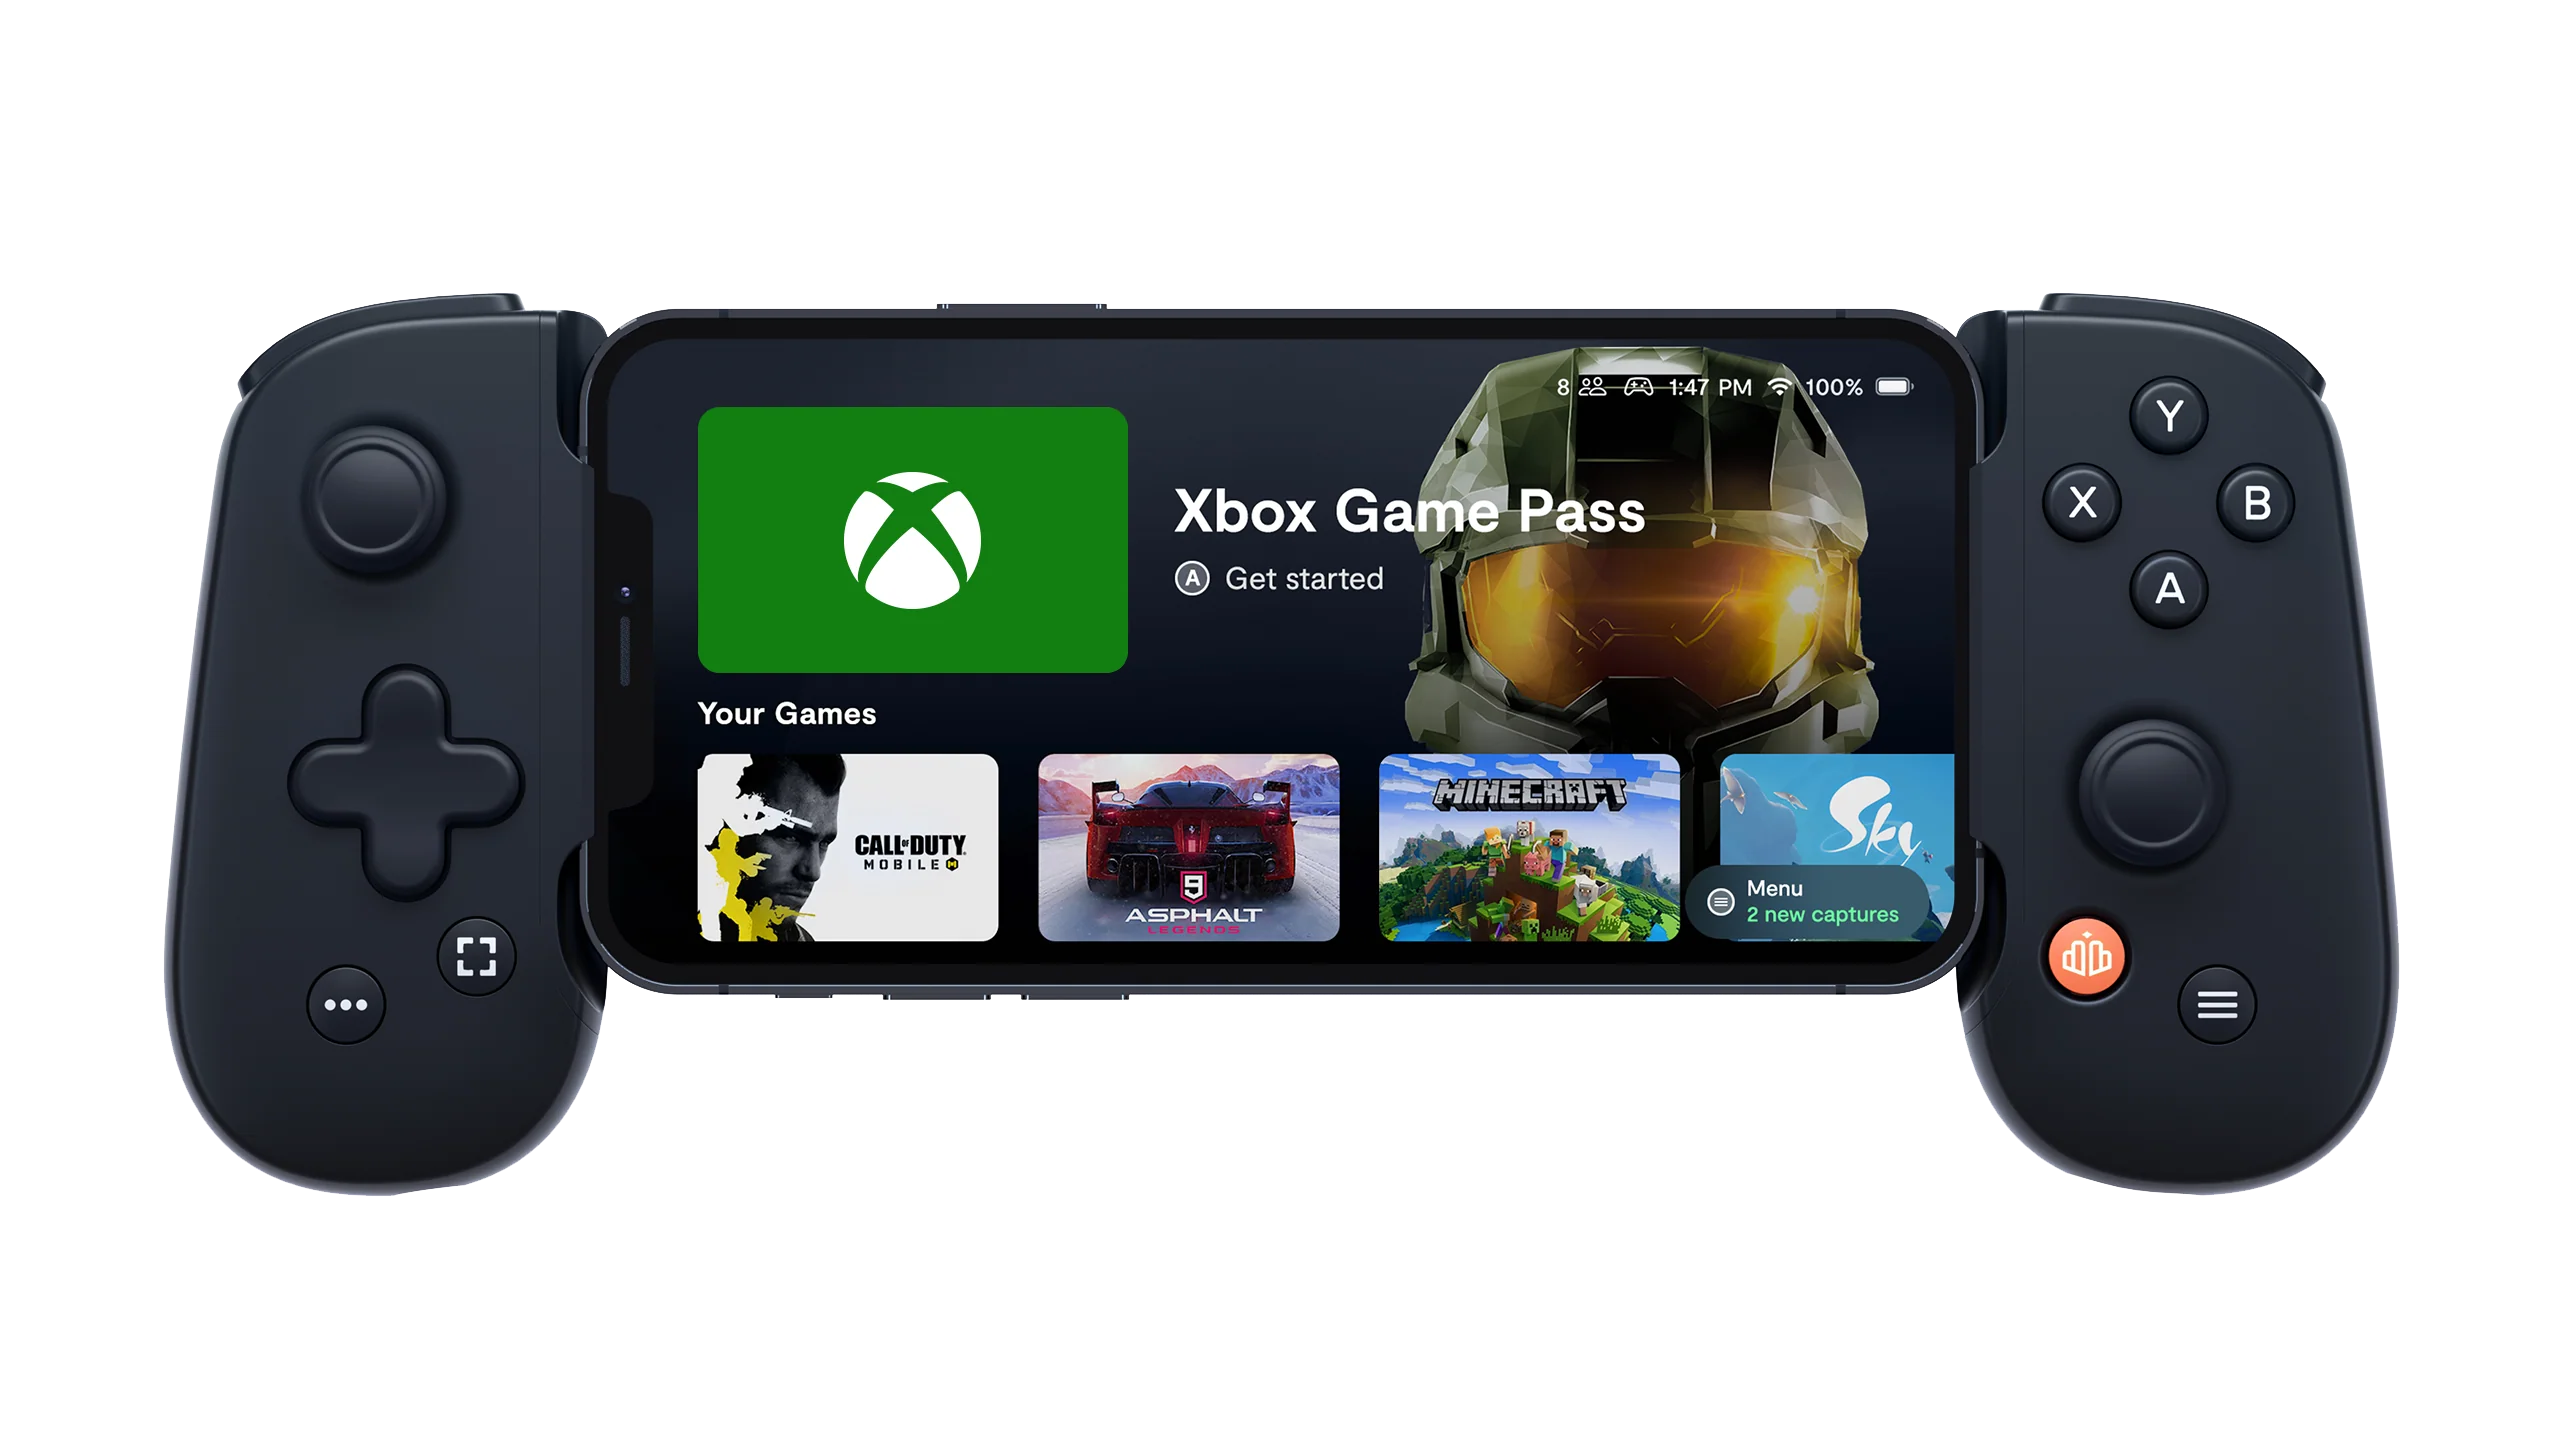 You can now play Xbox games on your iPhone, iPad, and Mac